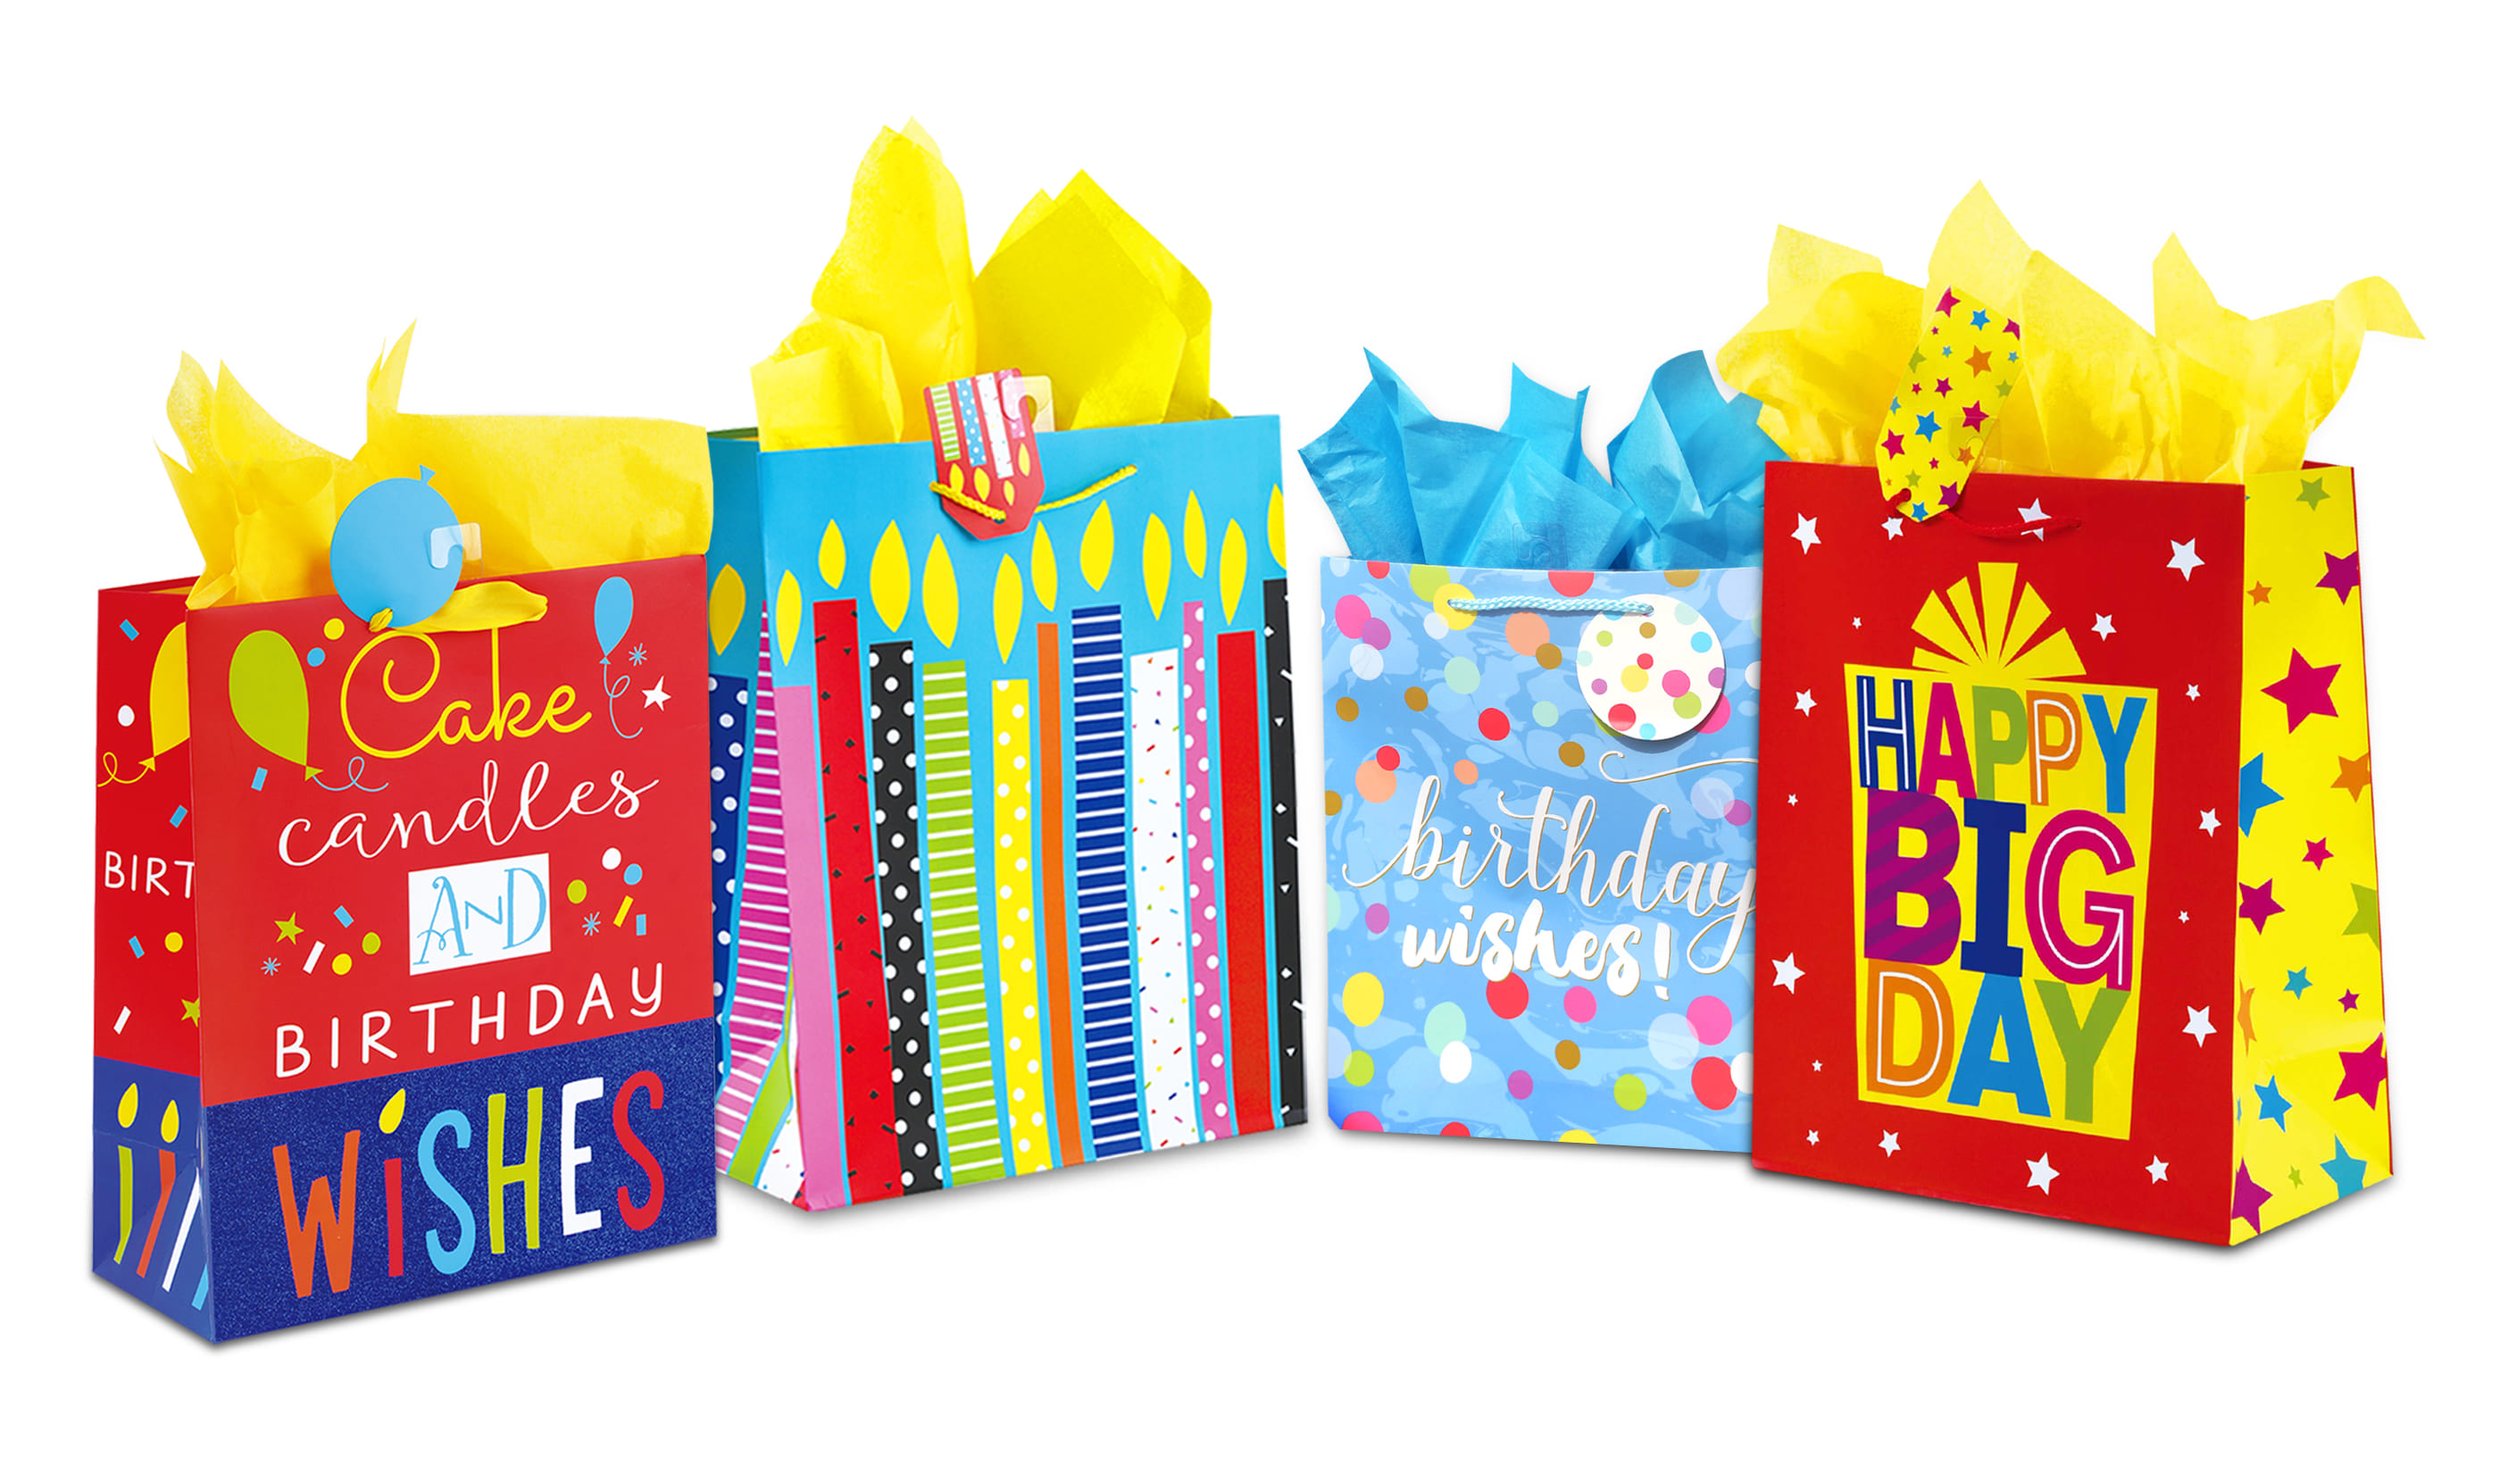 Best Wholesale Happy Birthday Gift Bags Ideas - for Kids, Teens